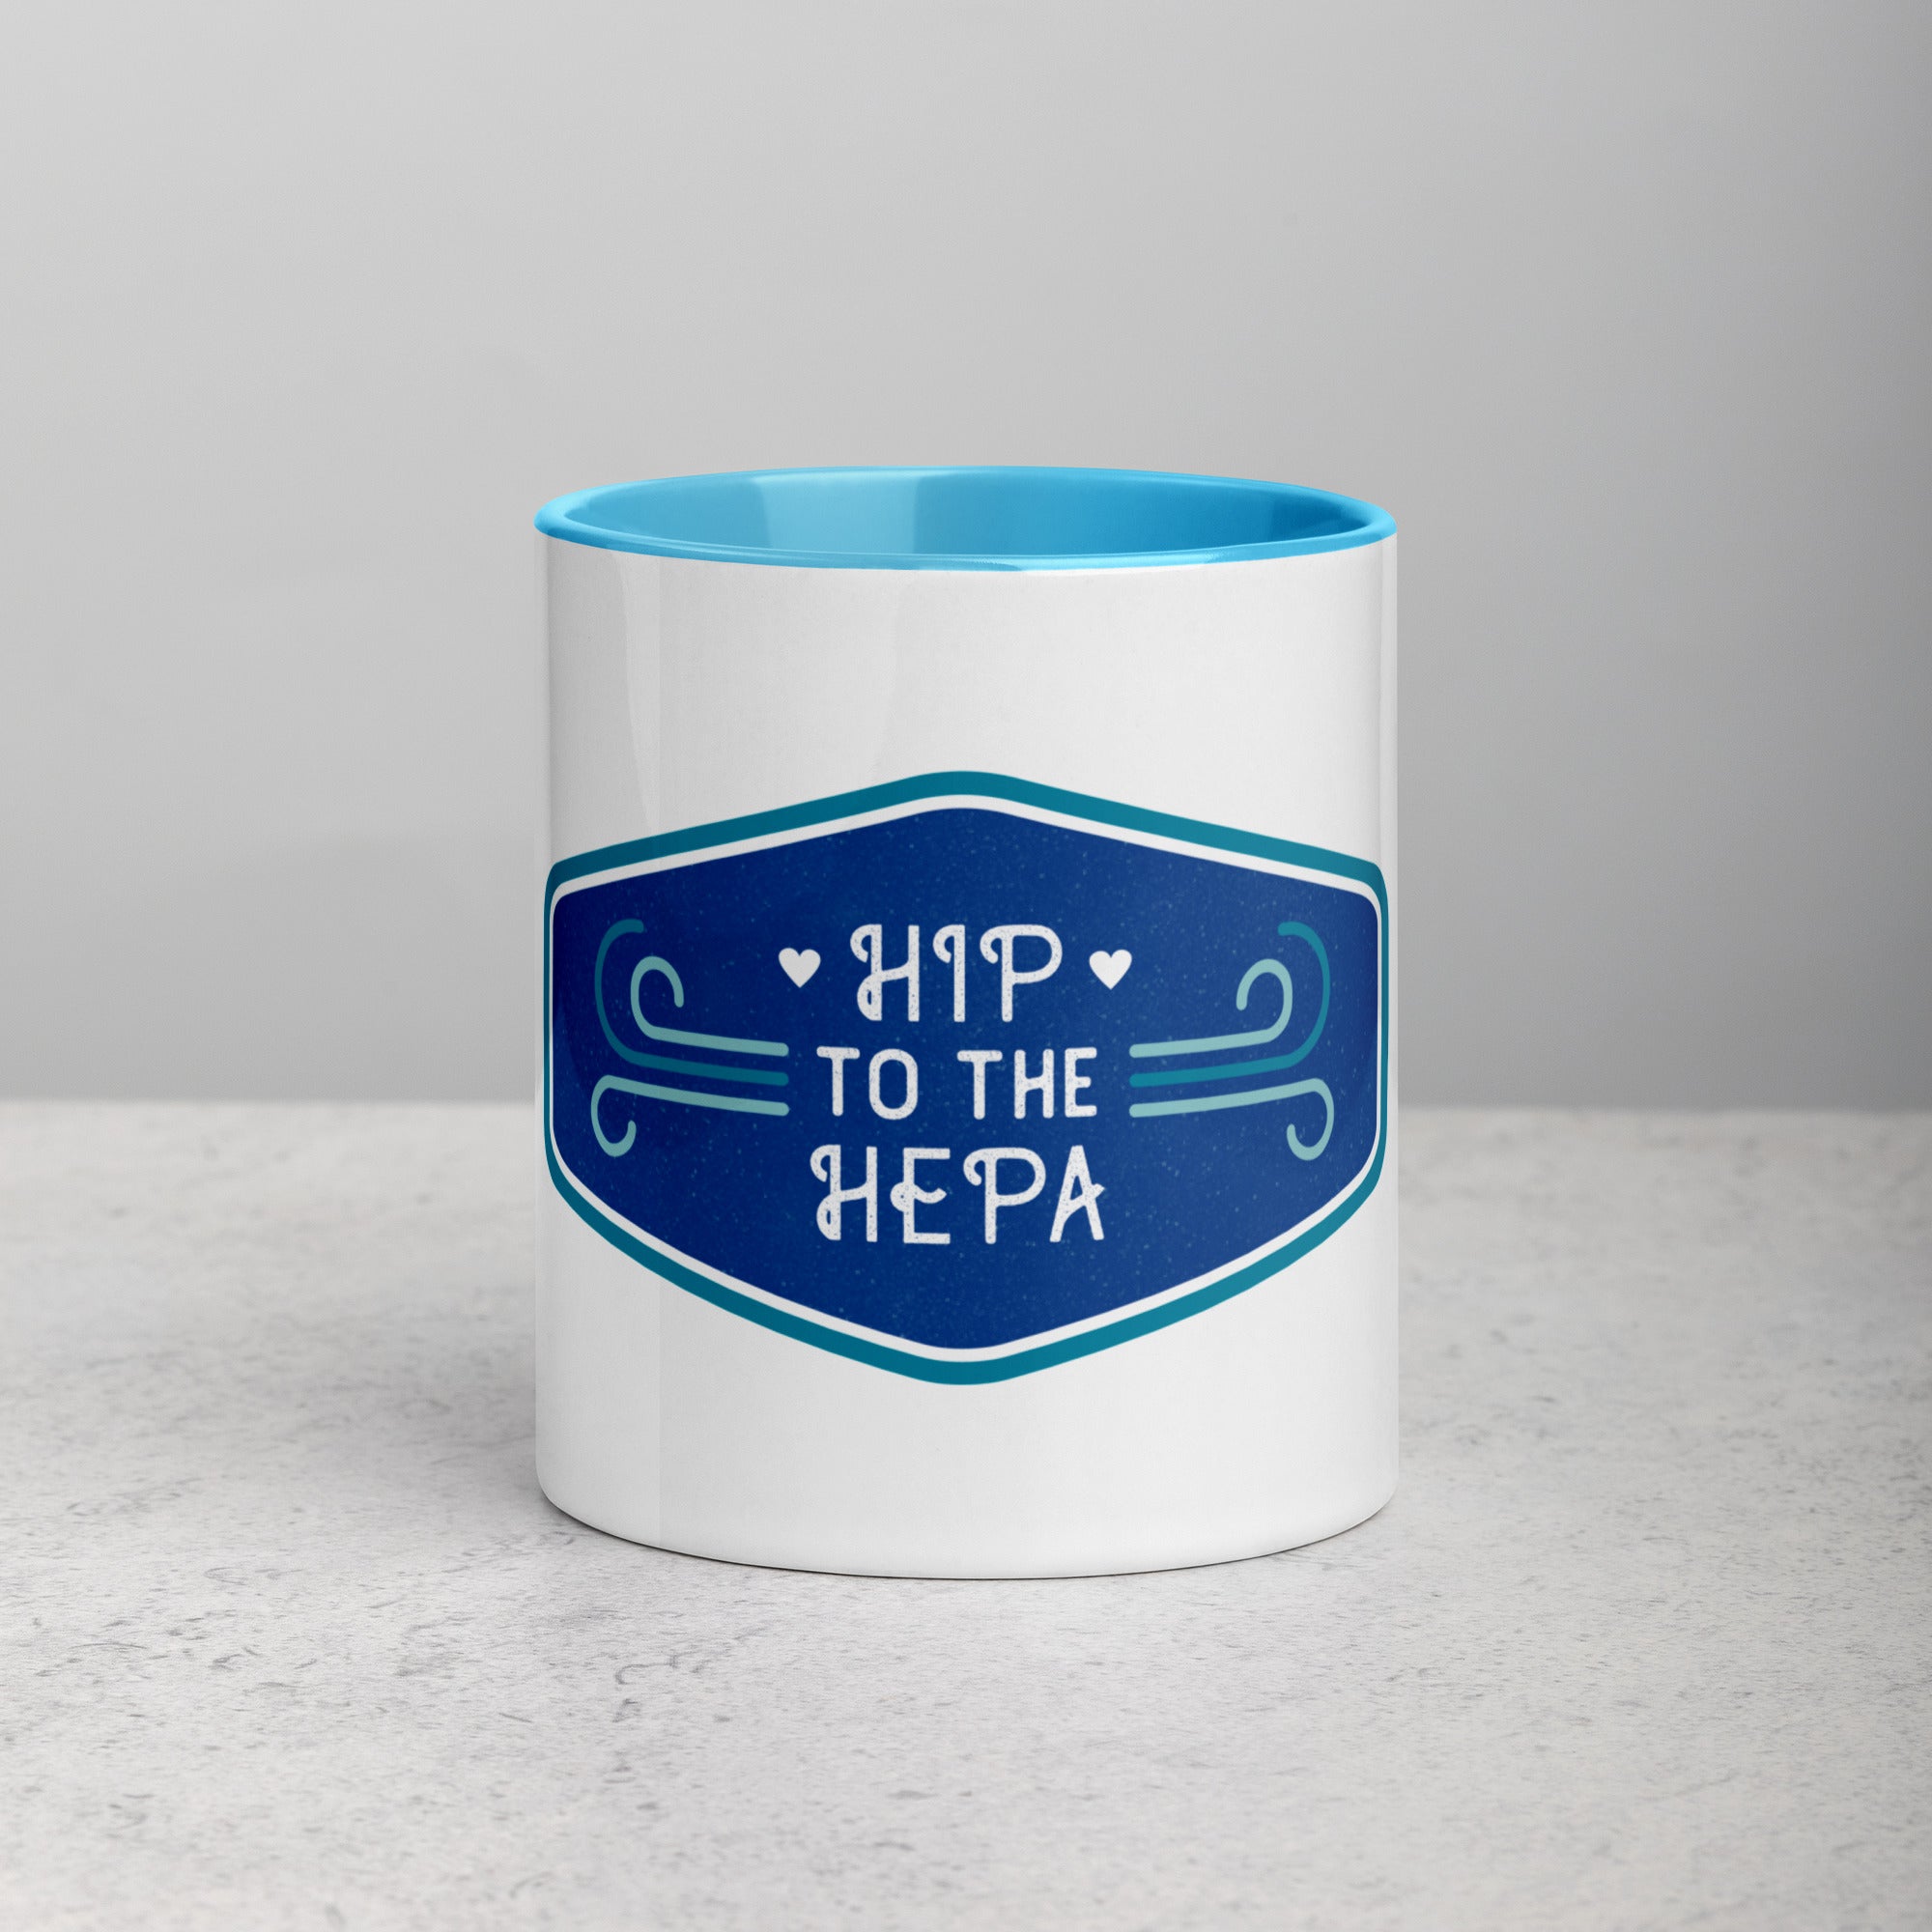 front facing white mug with blue interior and handle. Mug has blue logo image with text 'hip to the hepa'